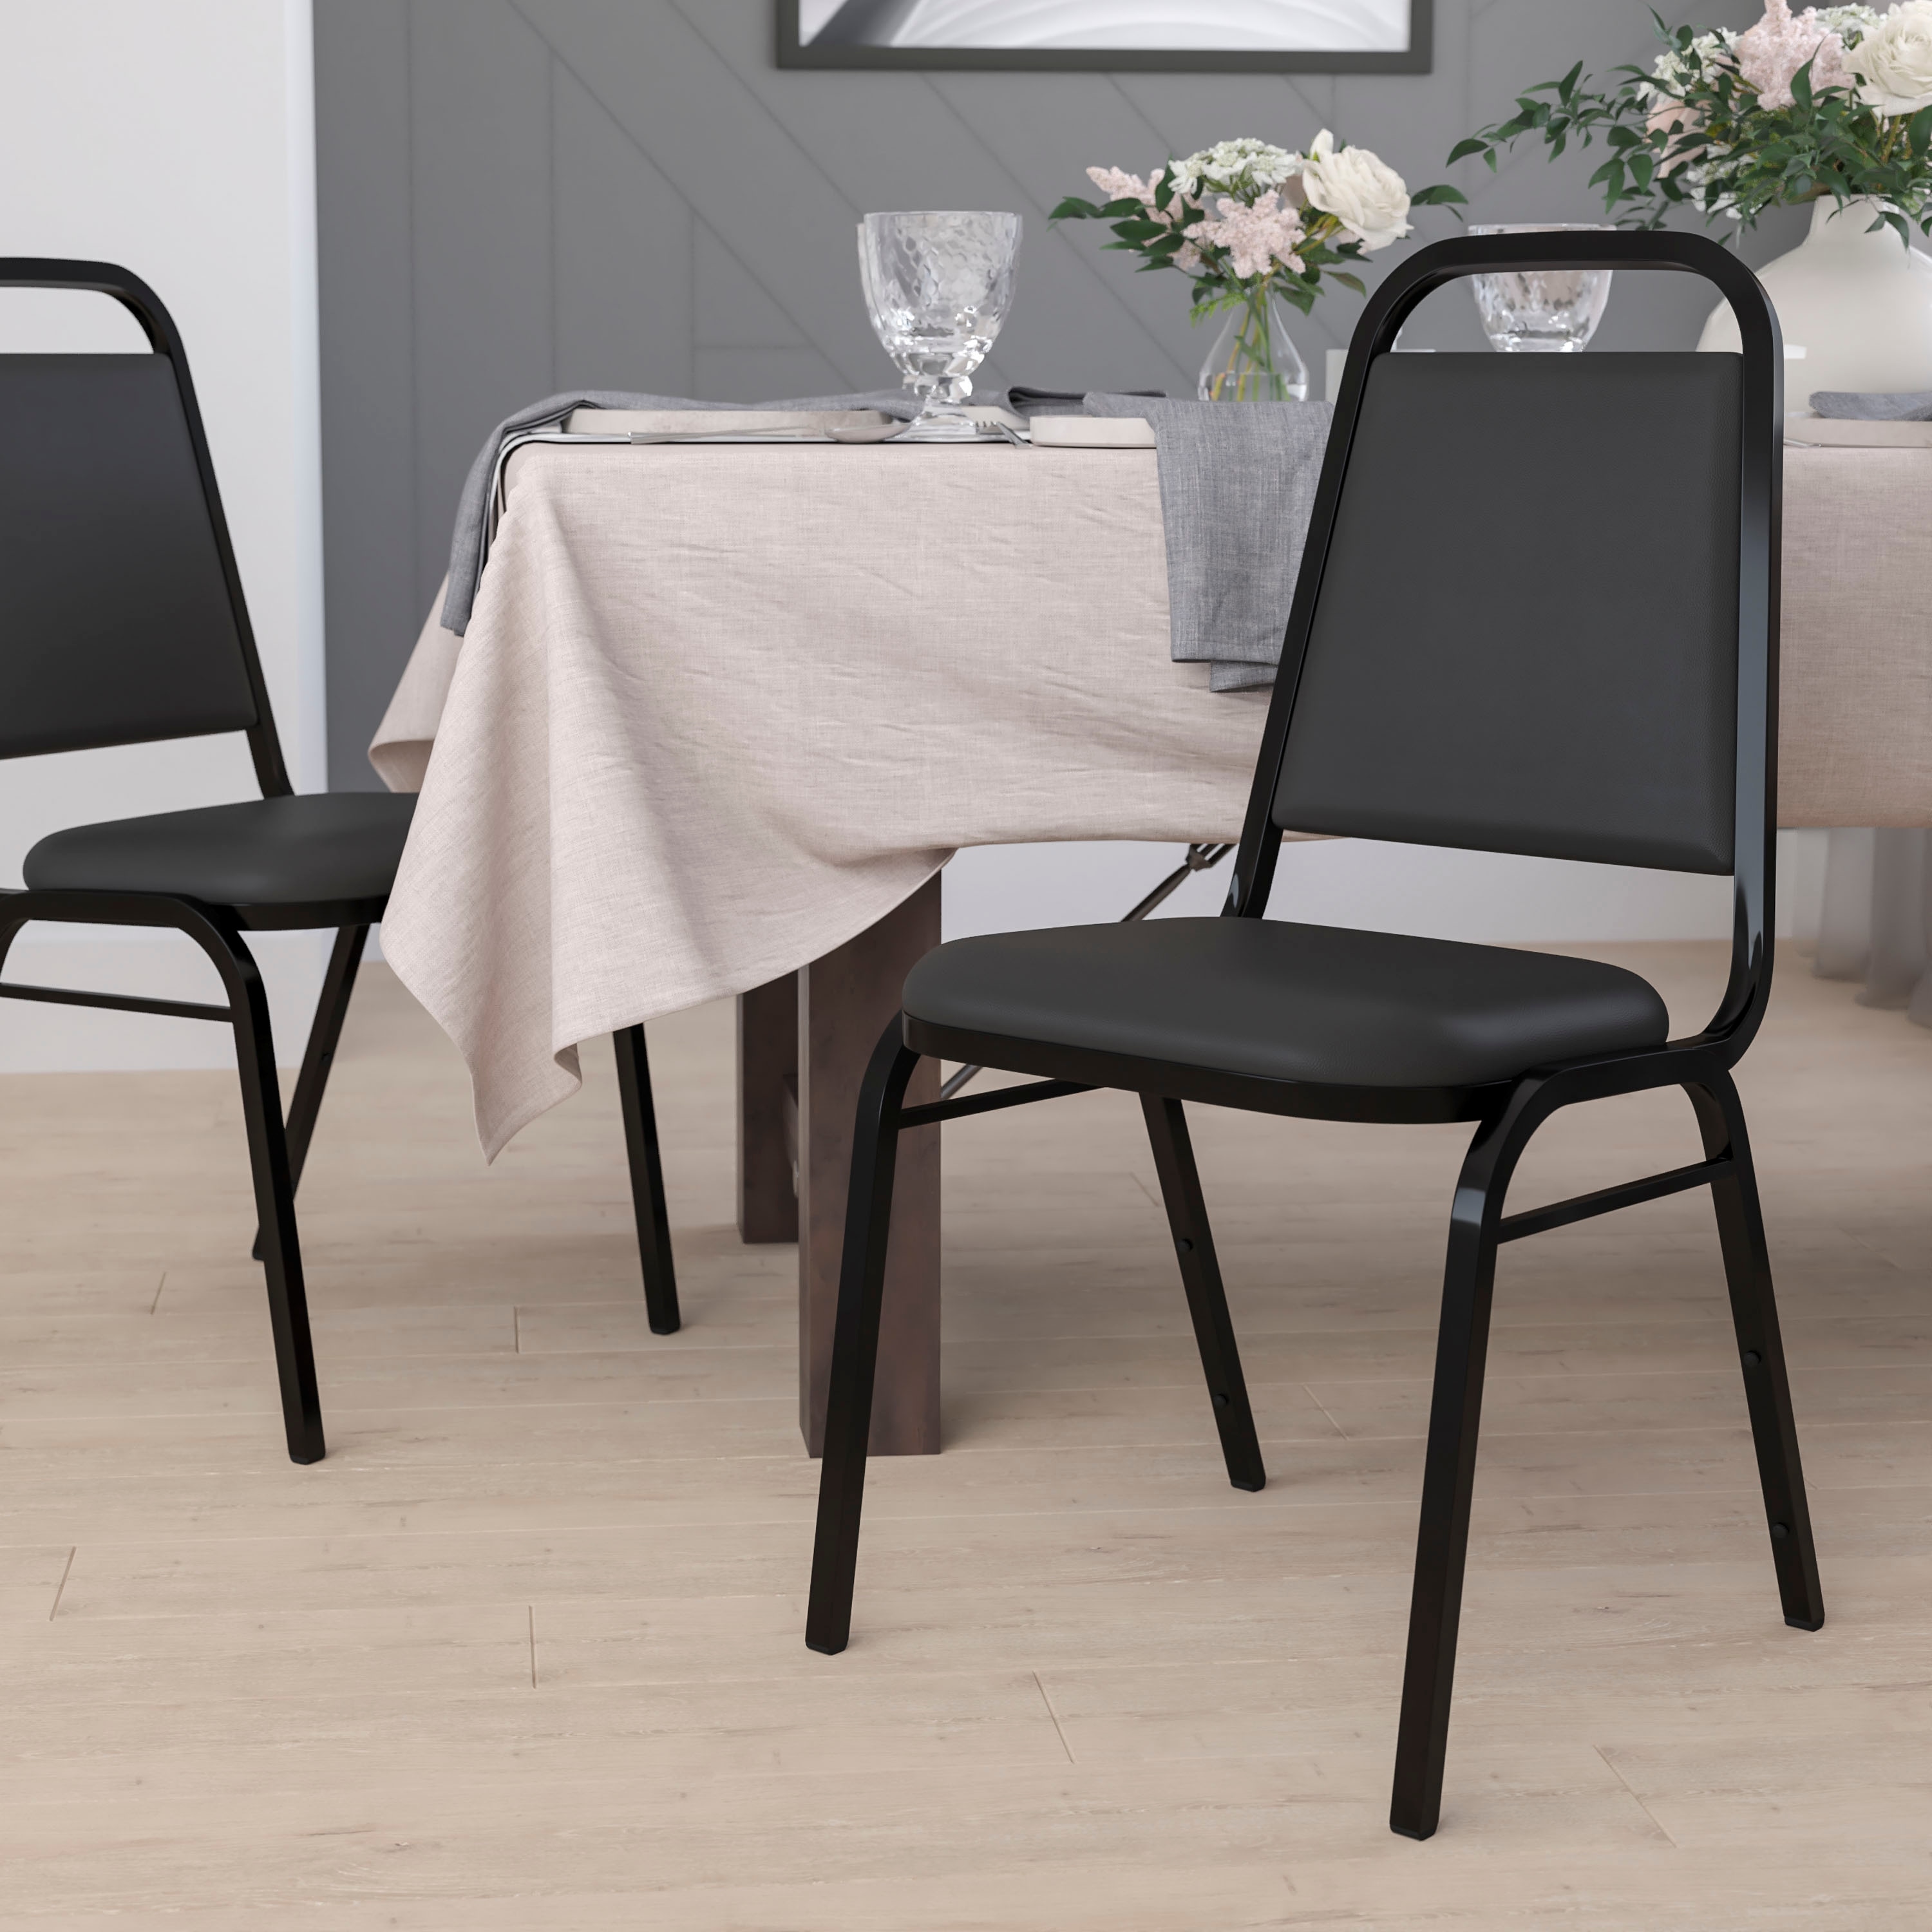 https://ak1.ostkcdn.com/images/products/is/images/direct/a382d783b2164a2632b39af5ac0be9664d802474/Trapezoidal-Back-Stacking-Banquet-Chair-with-1.5%22-Thick-Seat.jpg